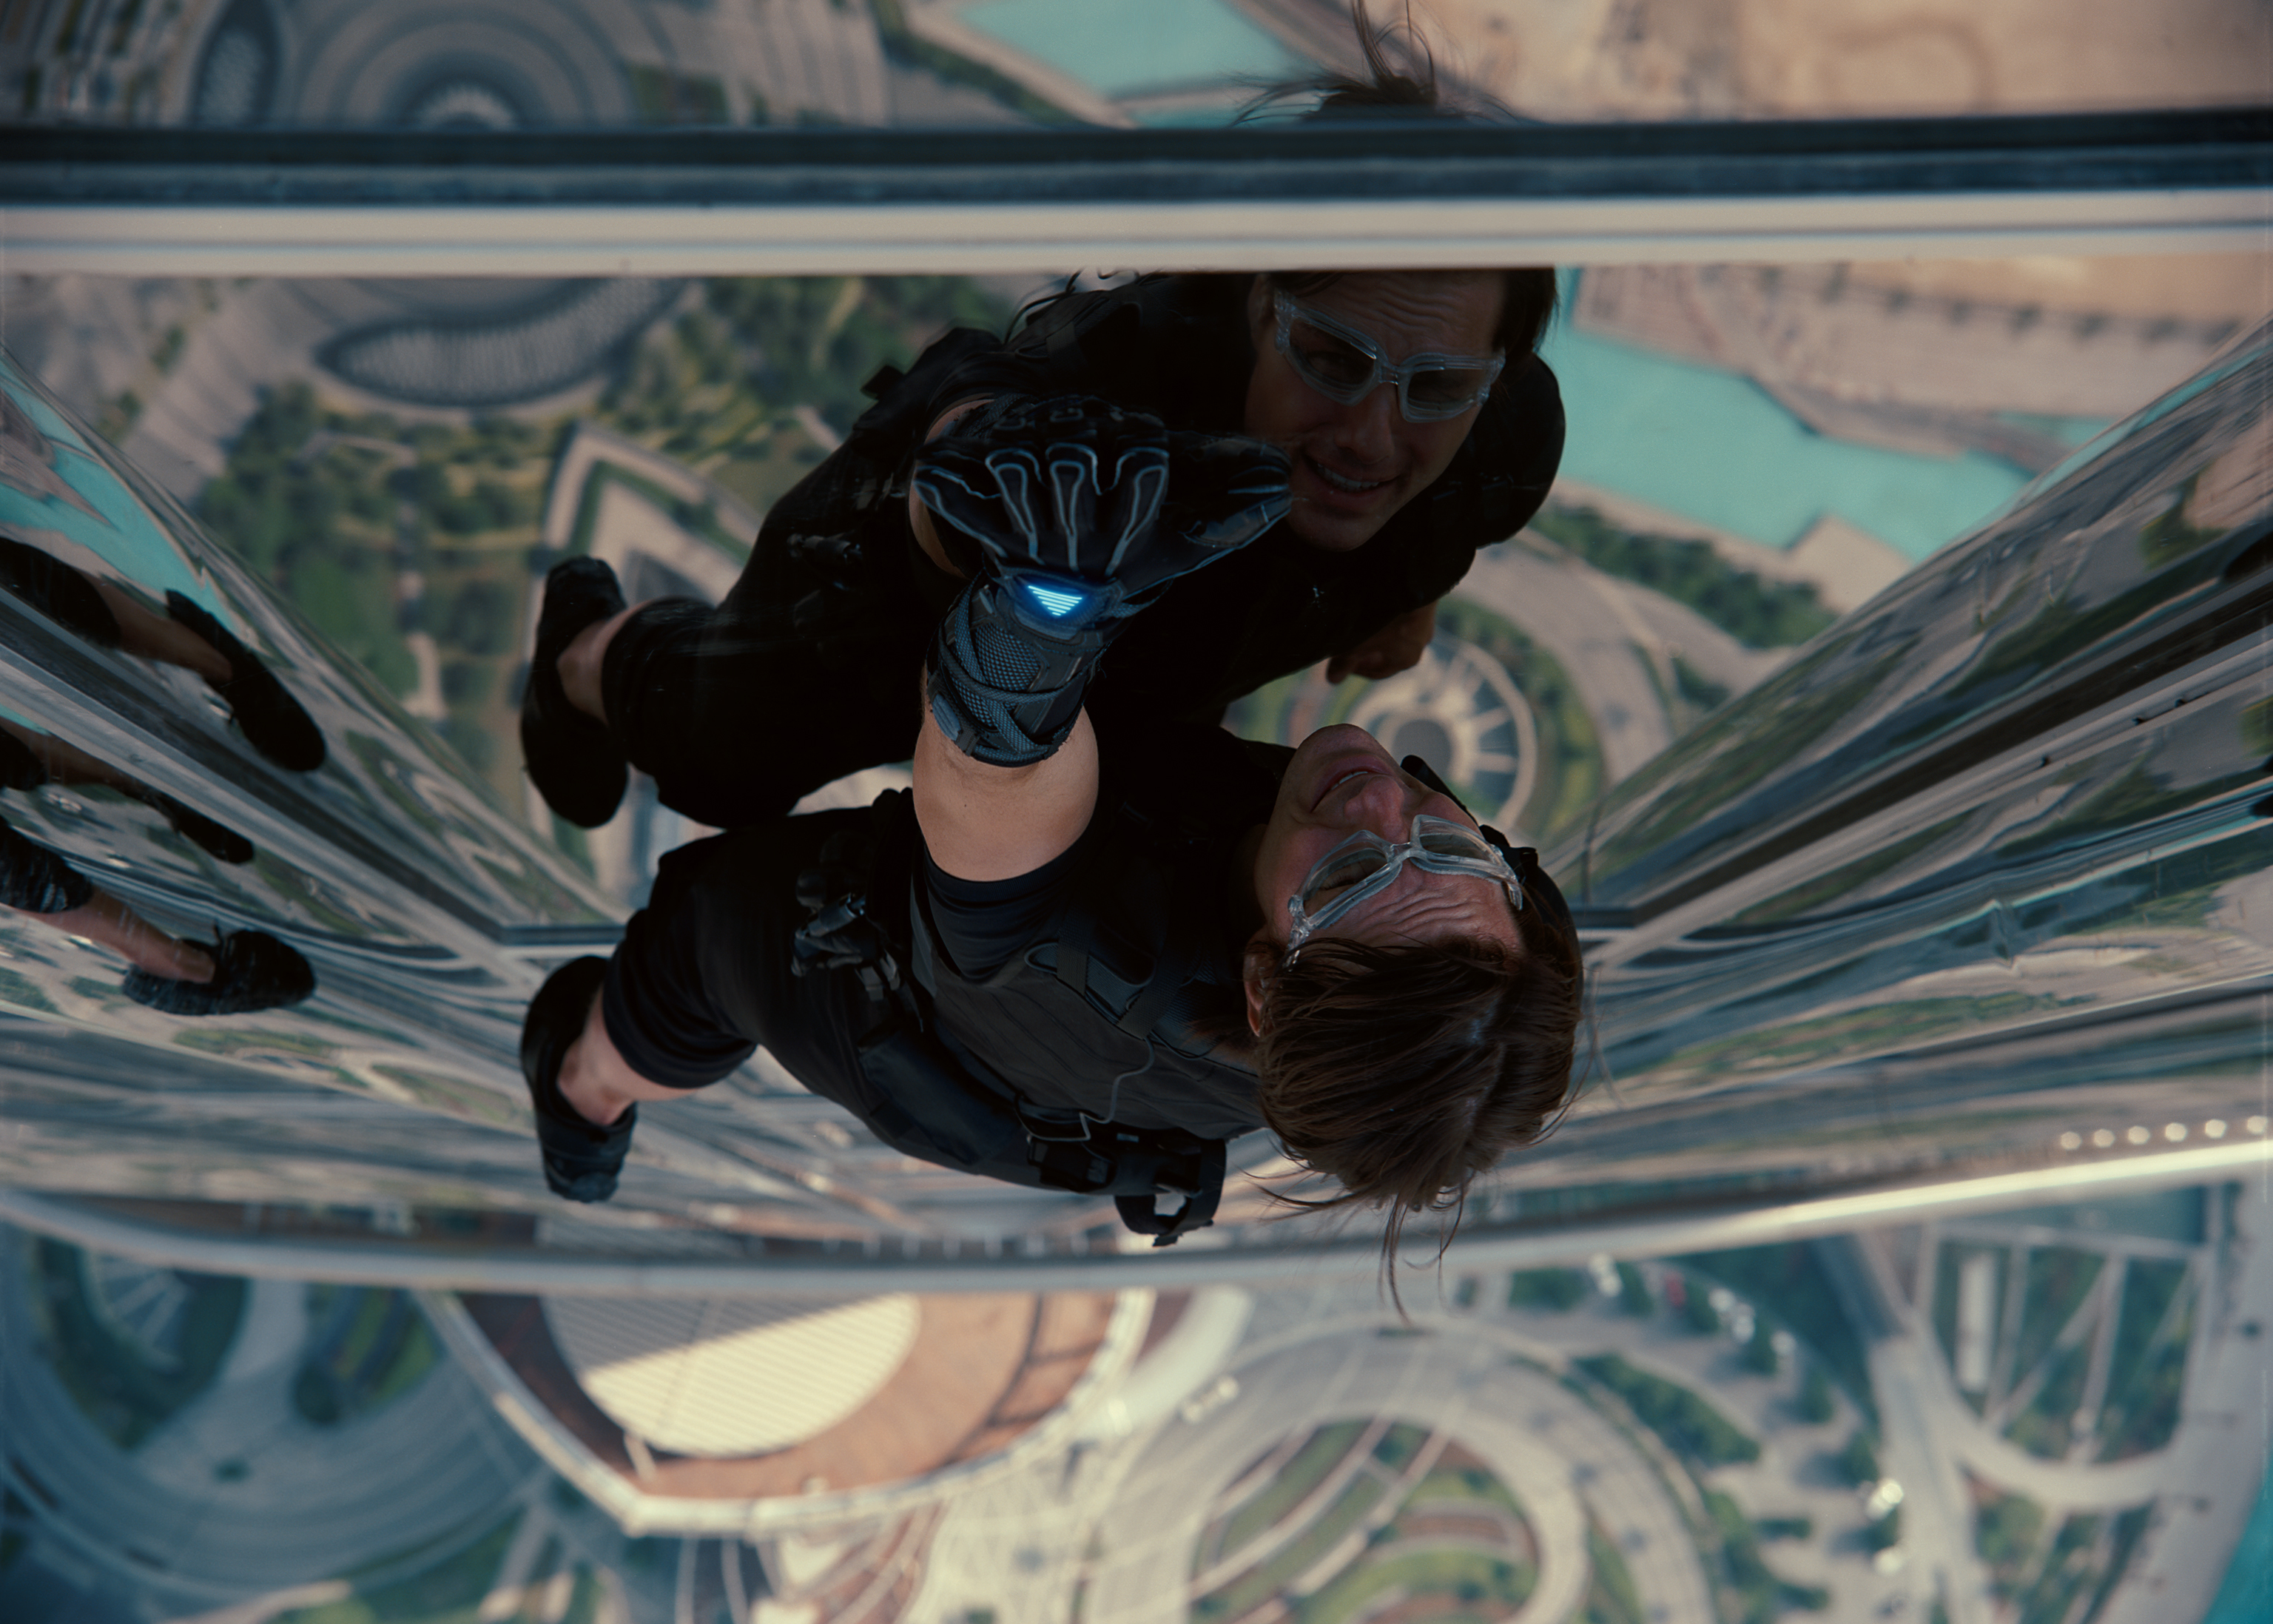 mission-impossible-ghost-protocol-image-2.jpg